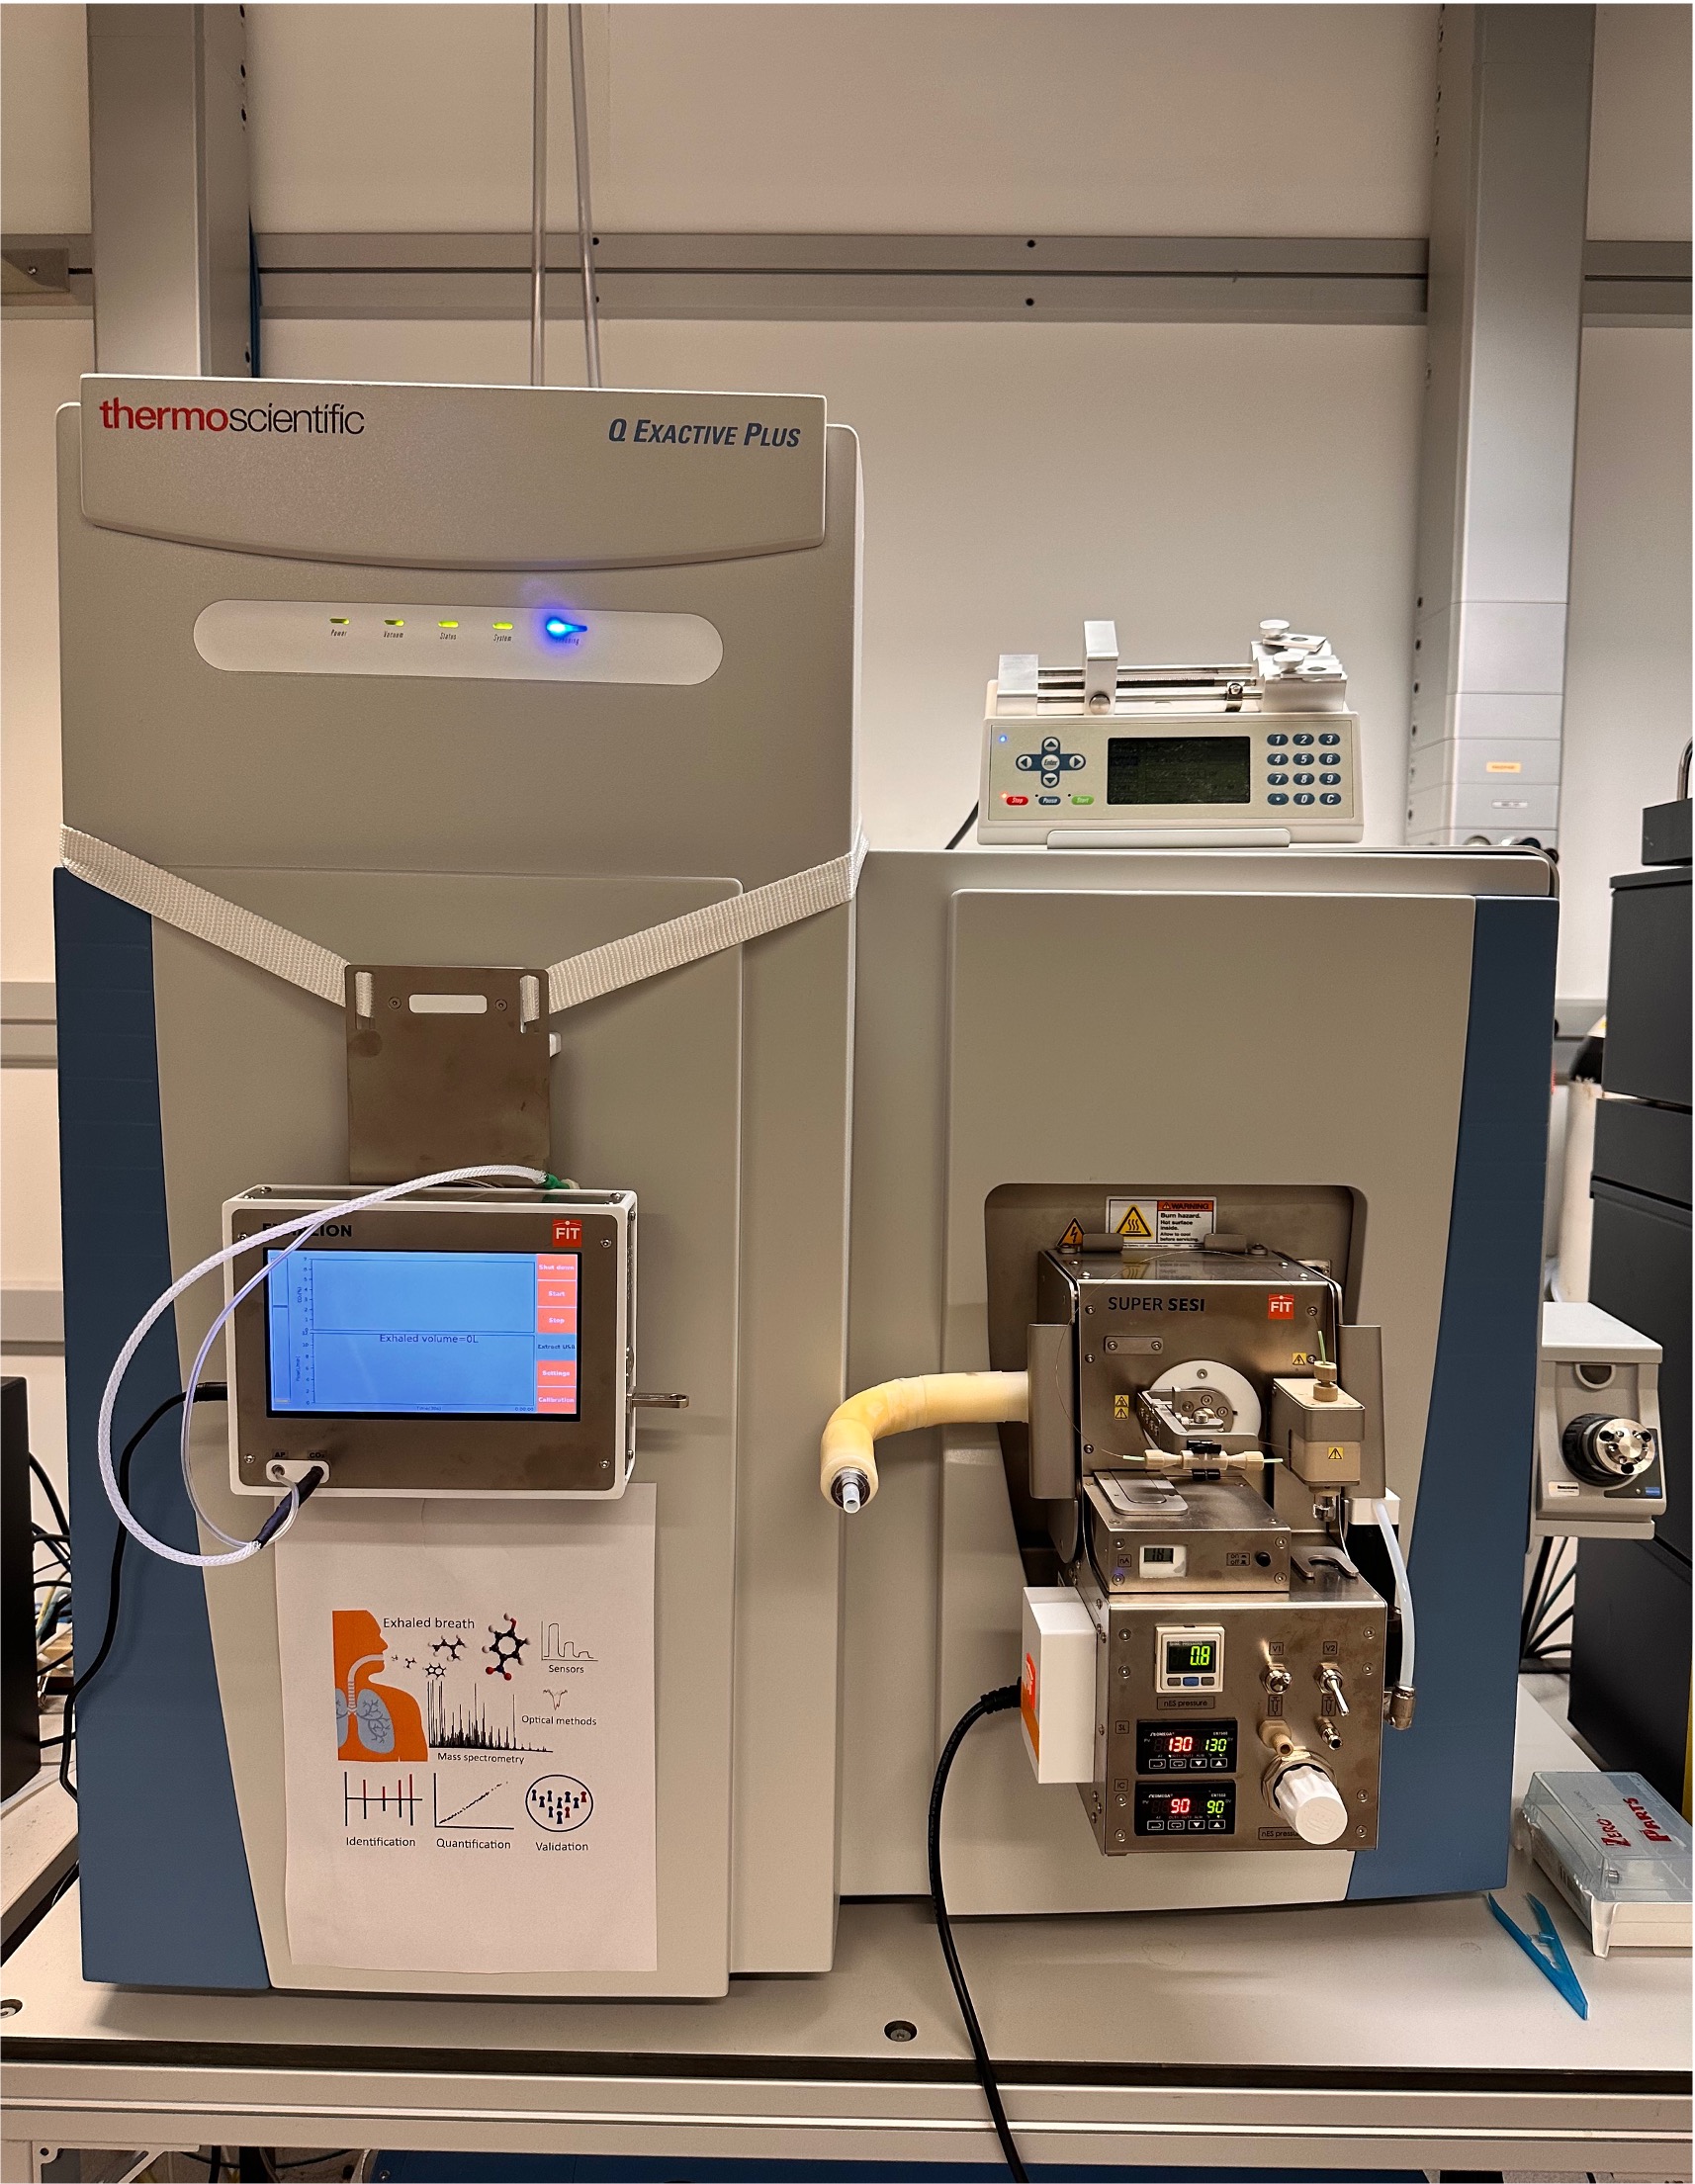 SESI source coupled to a Q-Exactive Plus Orbitrap MS